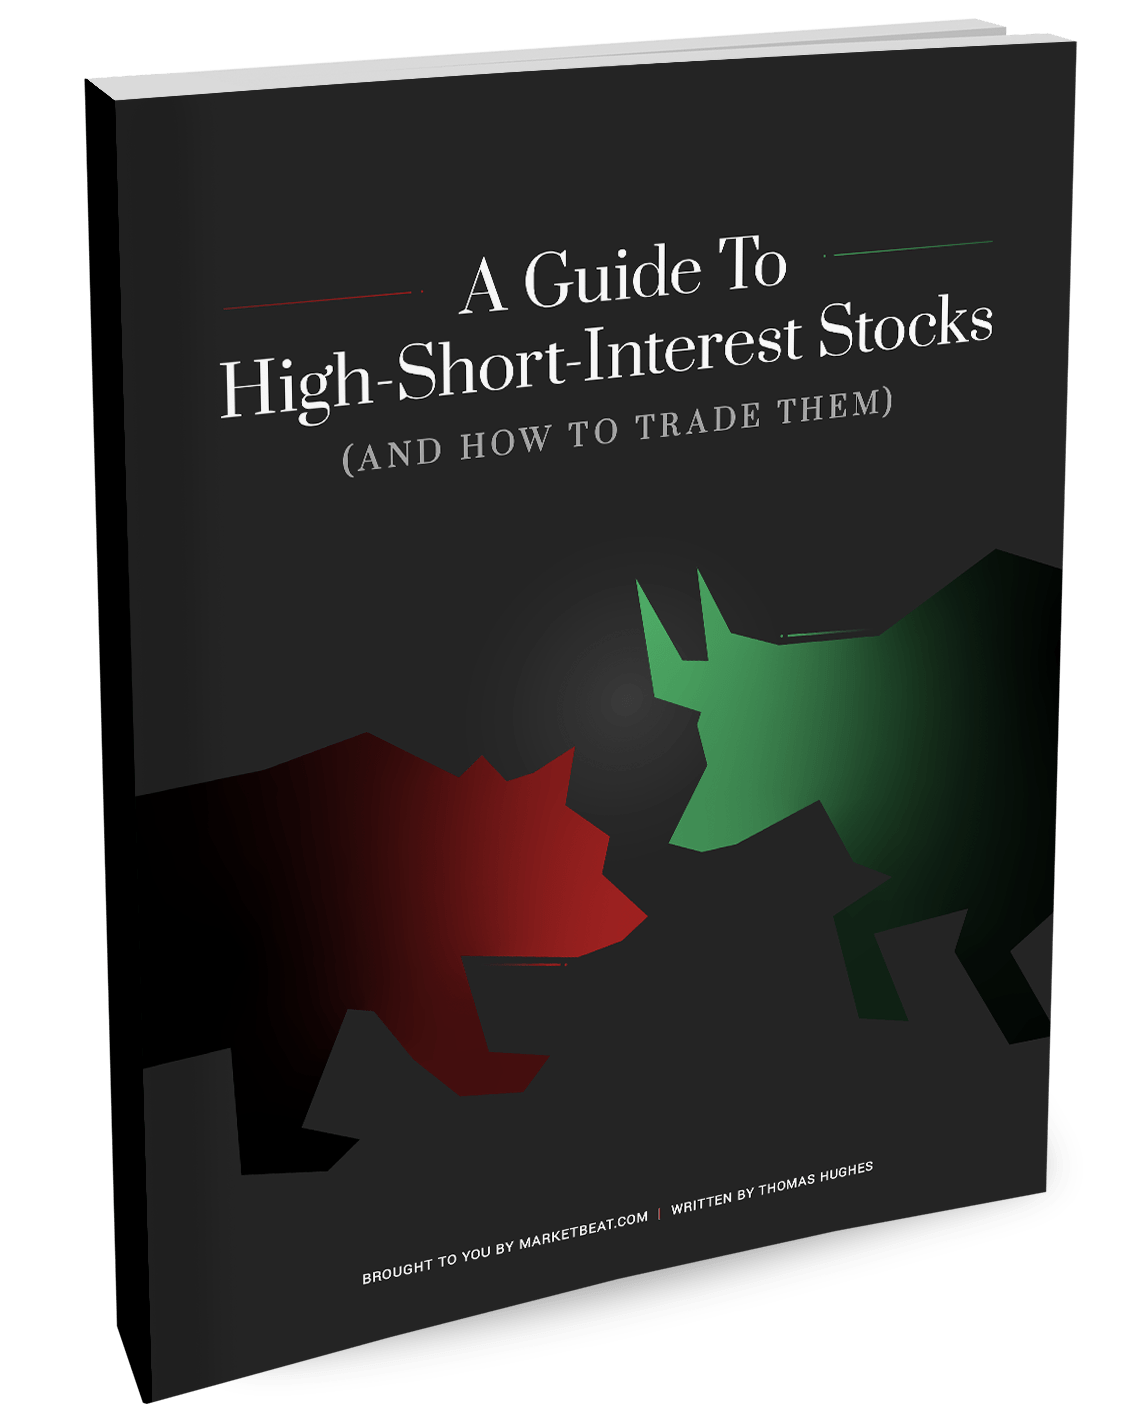 A Guide To High-Short-Interest Stocks